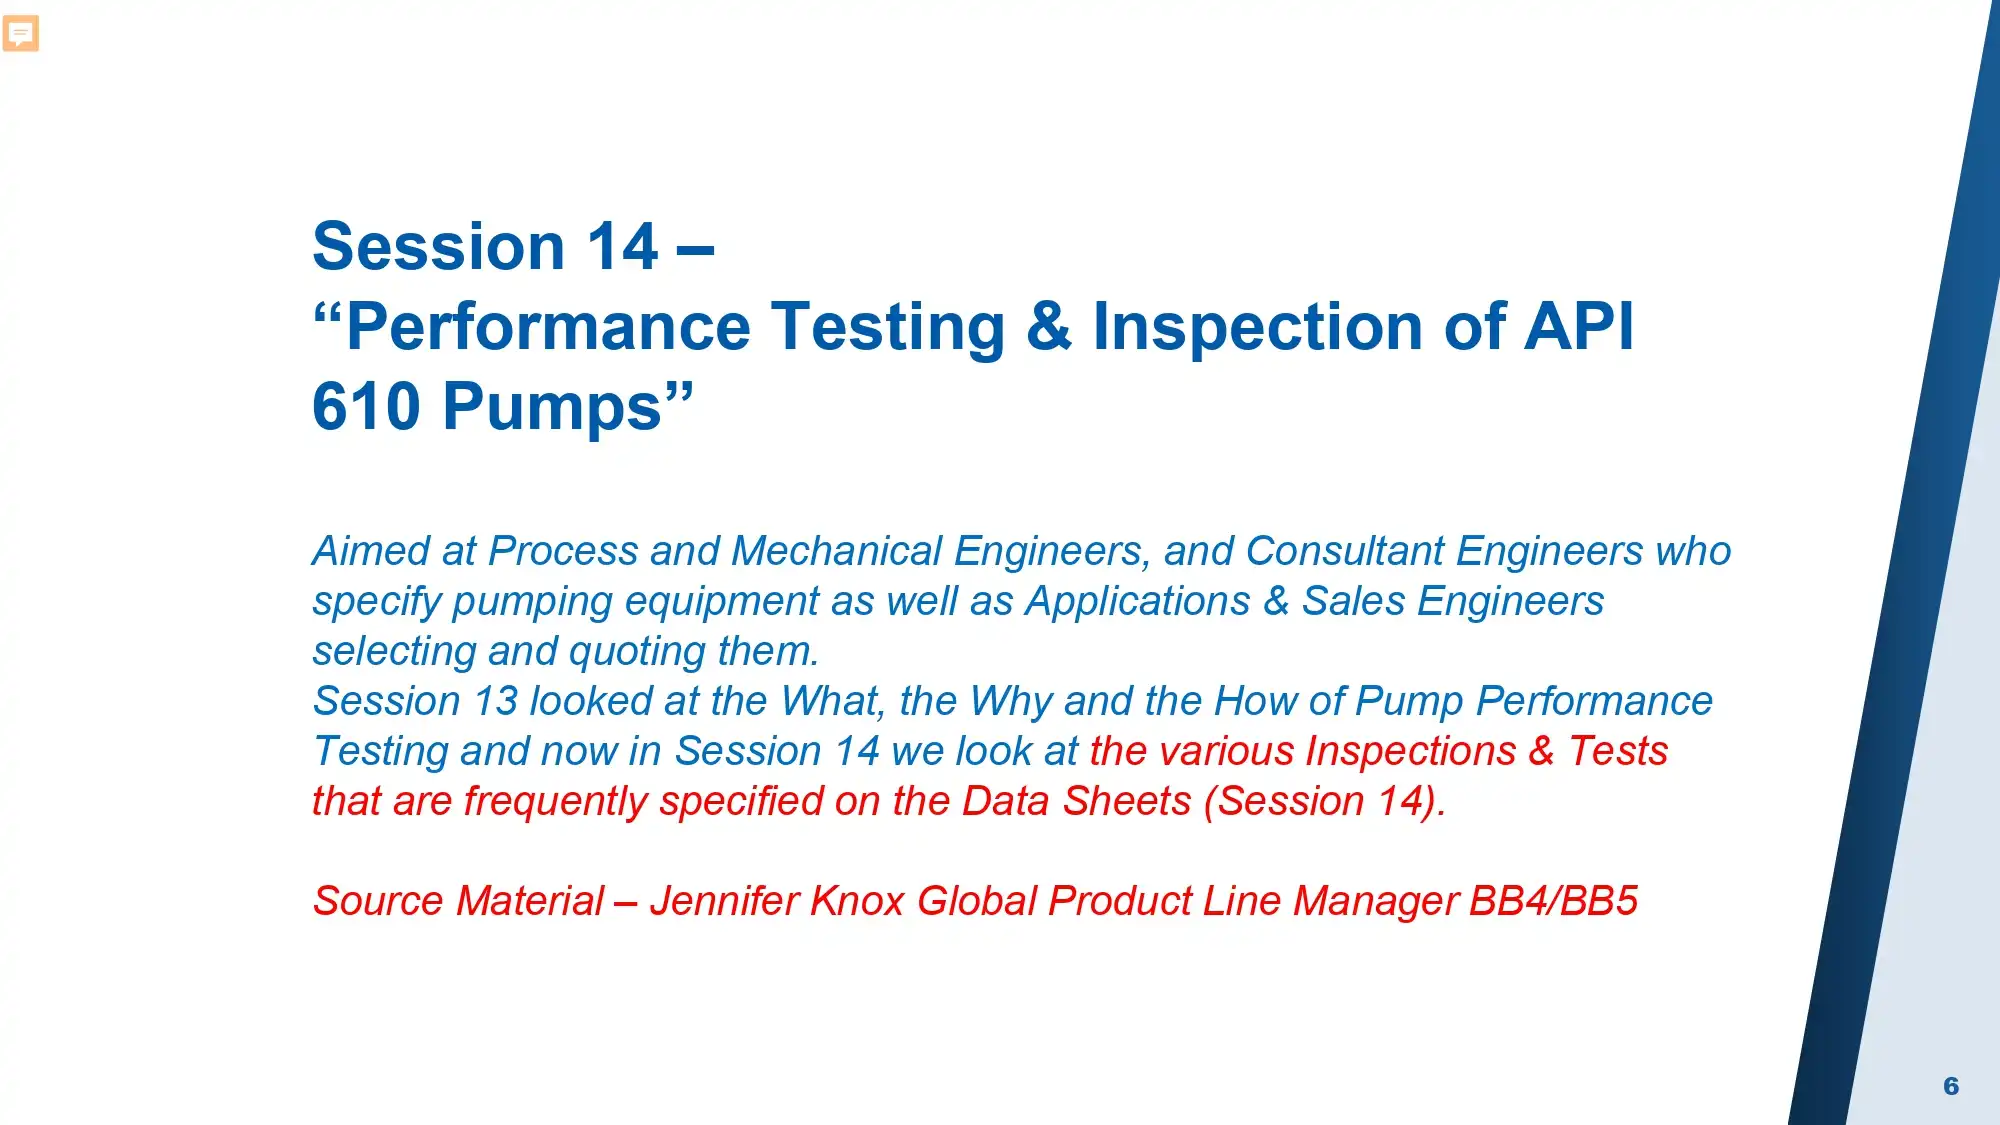 Session 14 – “Performance Testing & Inspection of API 610 Pumps”